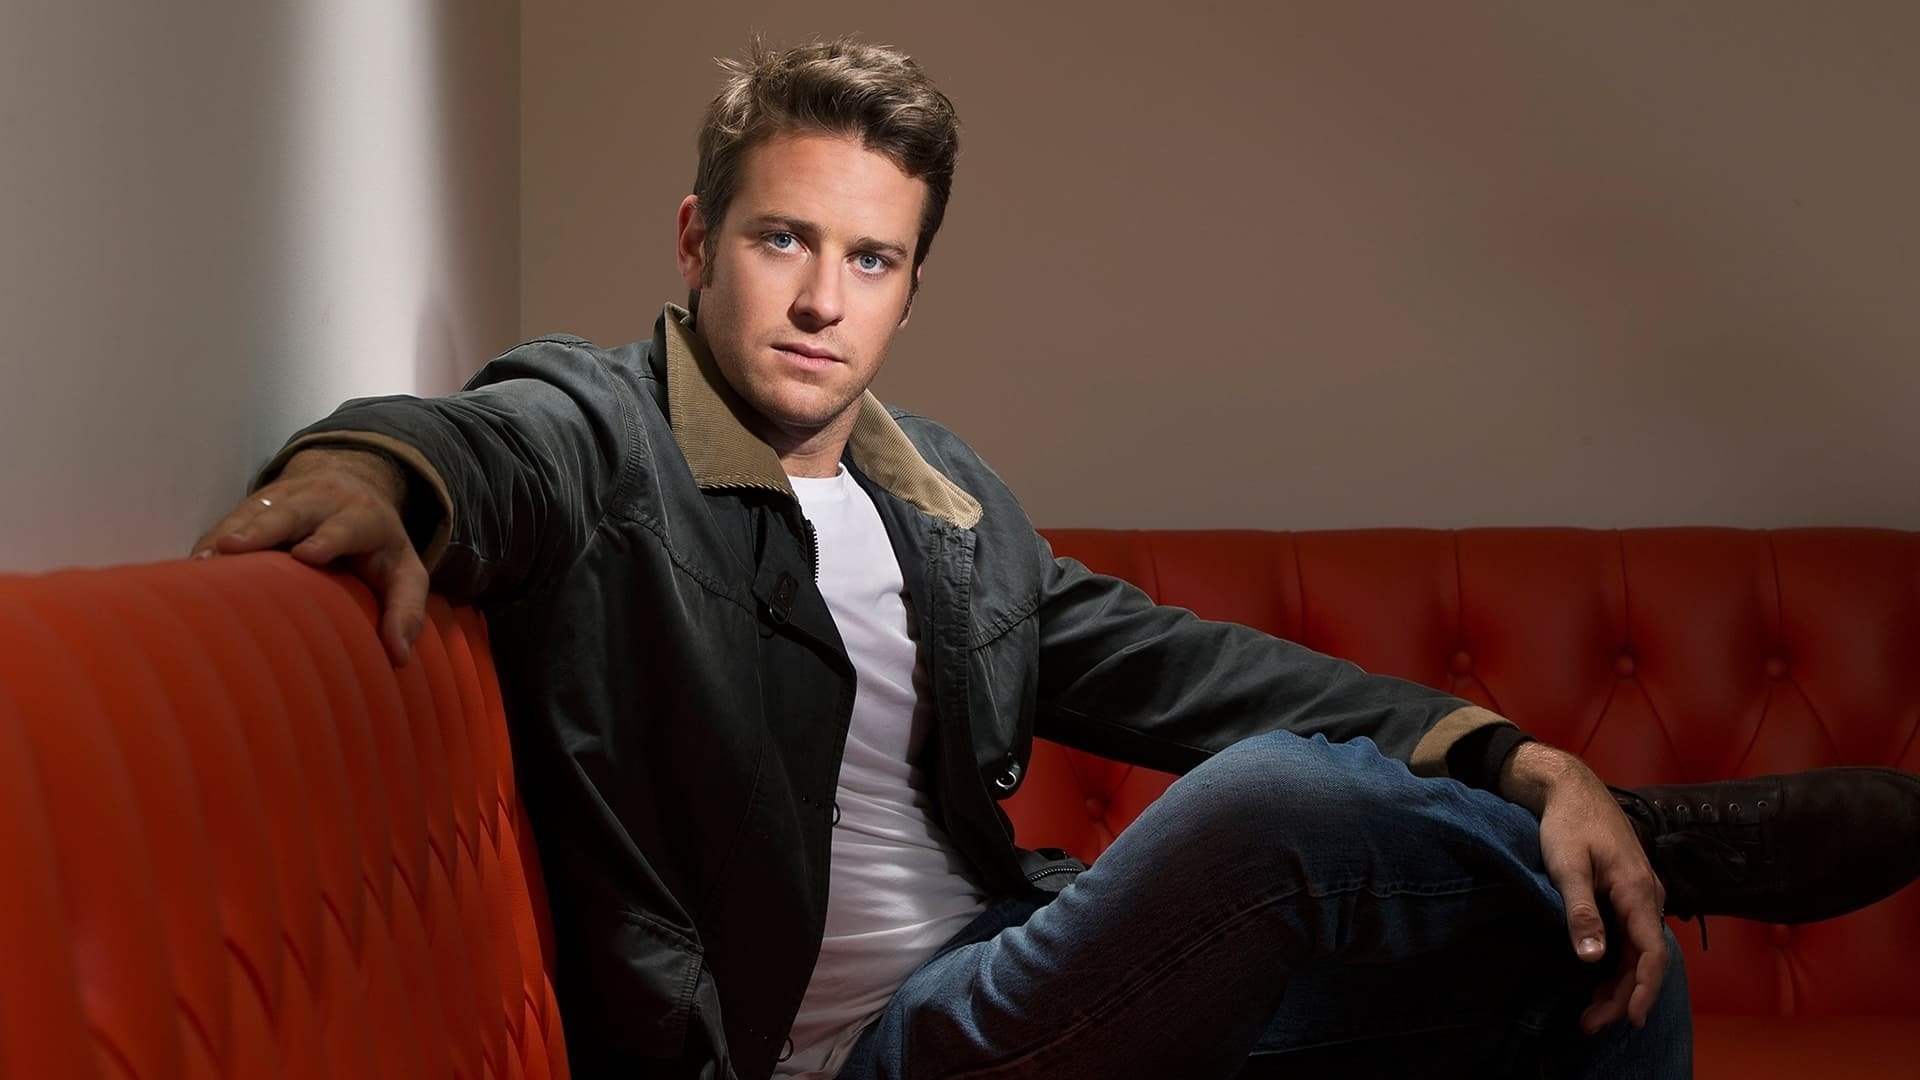 Armie Hammer movies, HD wallpapers, Actor background, High-resolution images, 1920x1080 Full HD Desktop